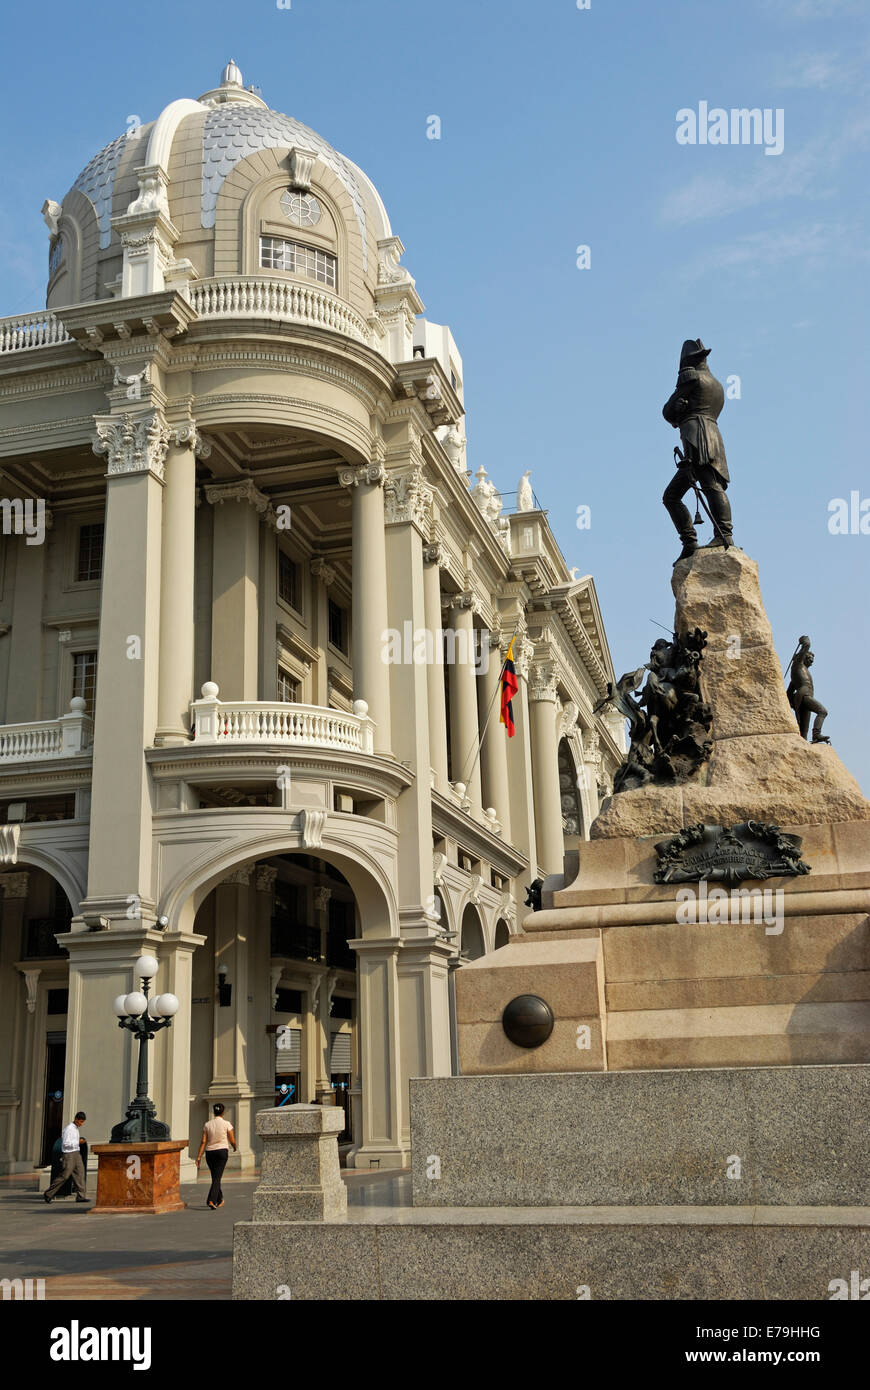 Statue of Mariscal Sucre in front of the City Hall building, Guayaquil, Ecuador, South America Stock Photo